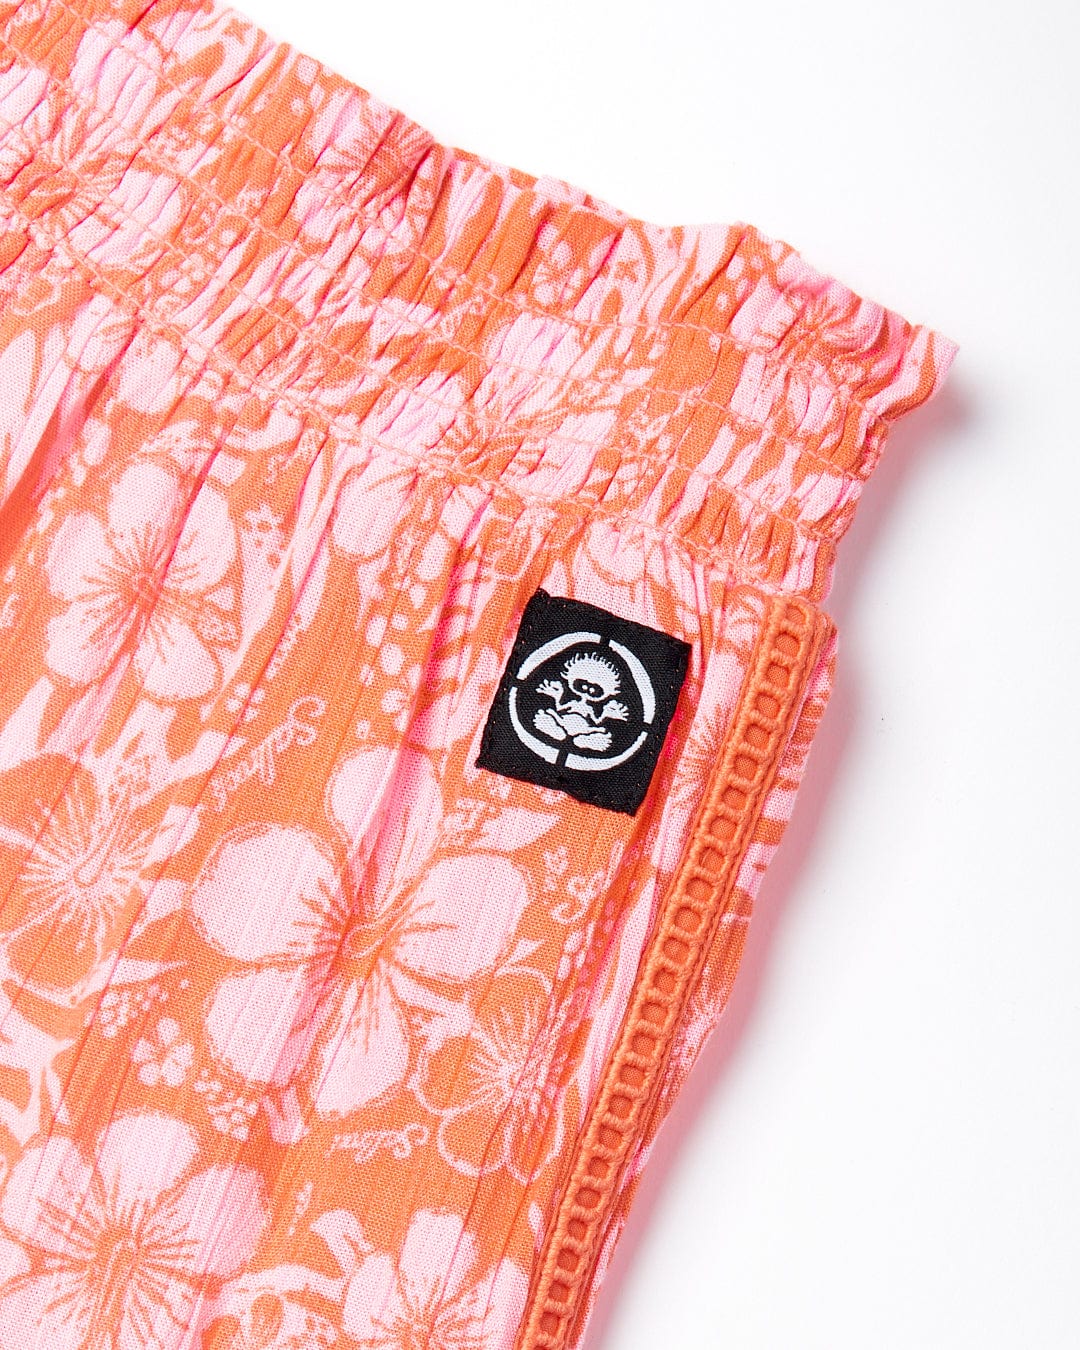 Close-up of Lottie Hibiscus - Kids Trousers - Orange/Pink fabric with a shirred waistband and a Saltrock logo patch.